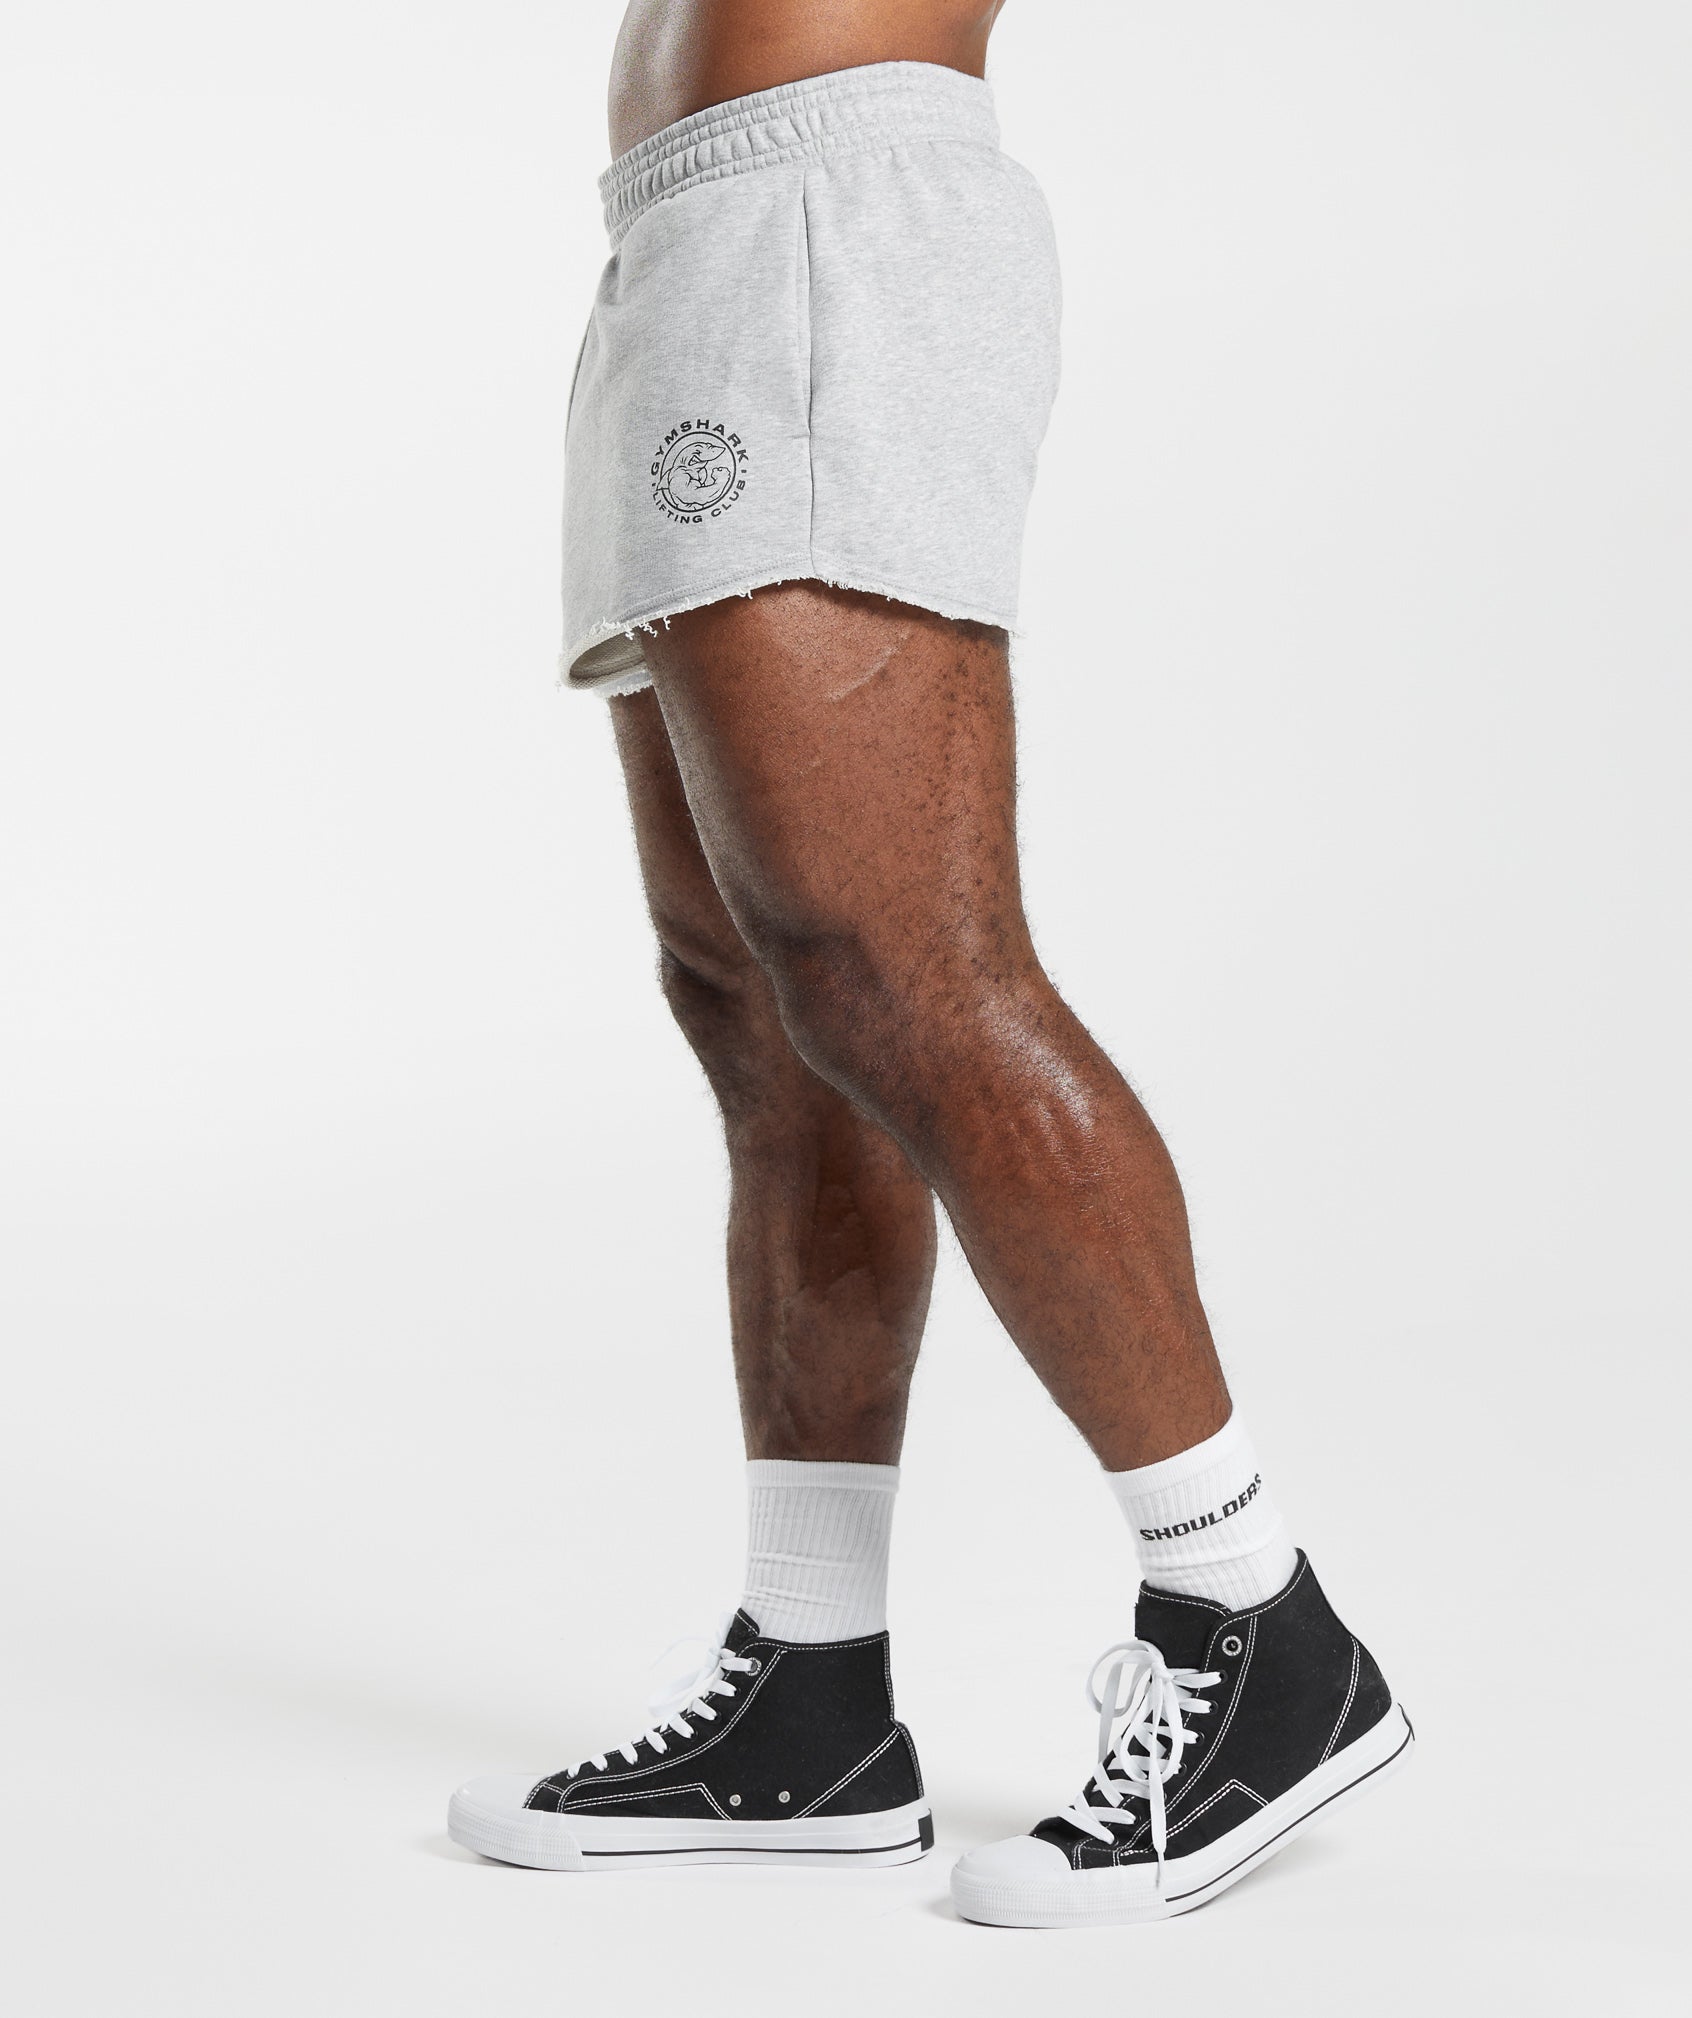 Legacy Shorts in Light Grey Marl - view 3